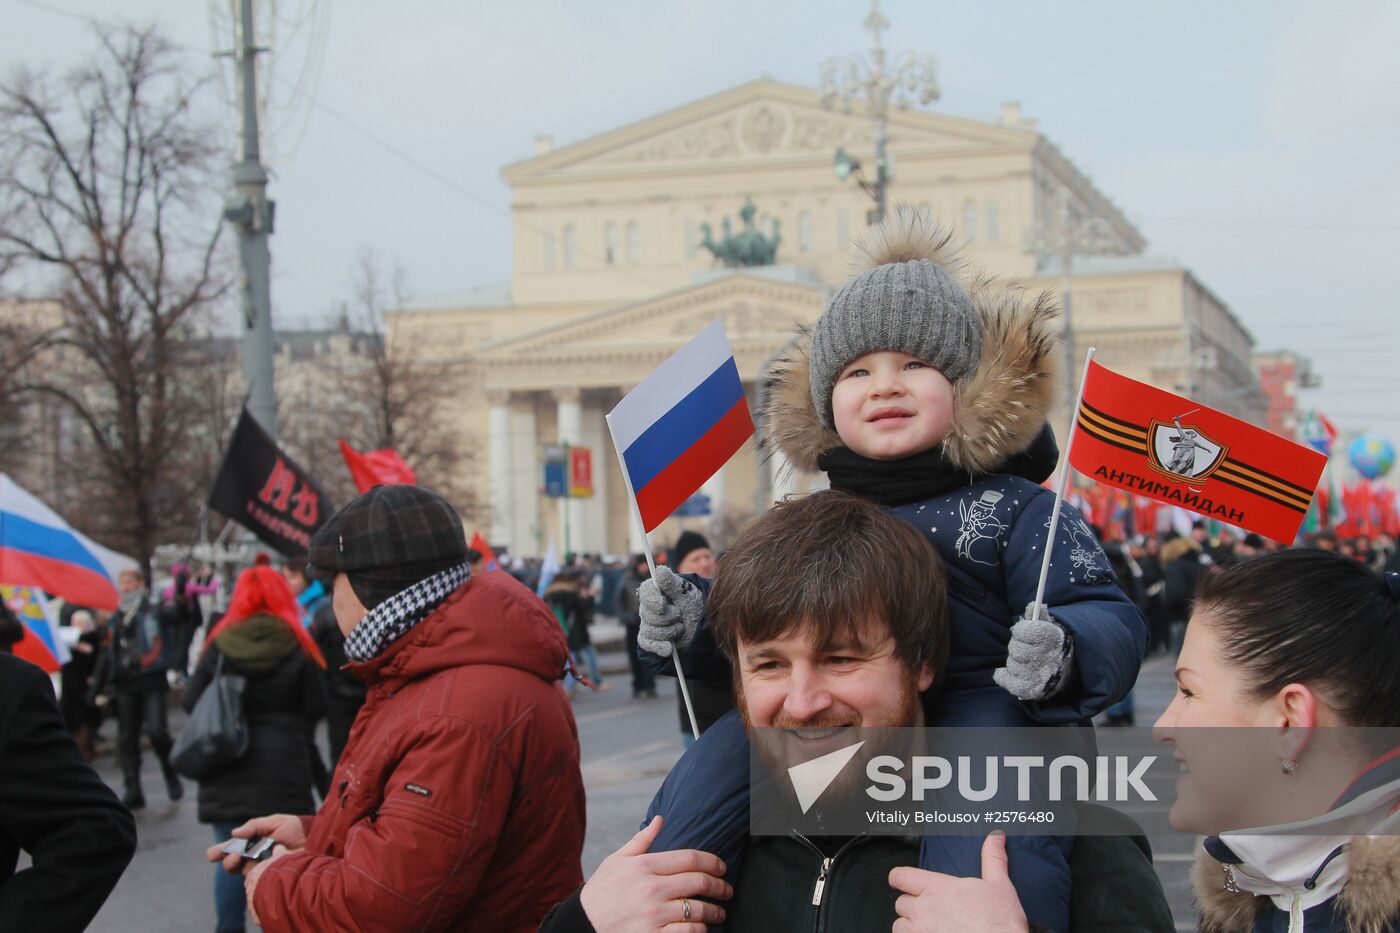 Antimaidan Movement holds rally and march in Moscow